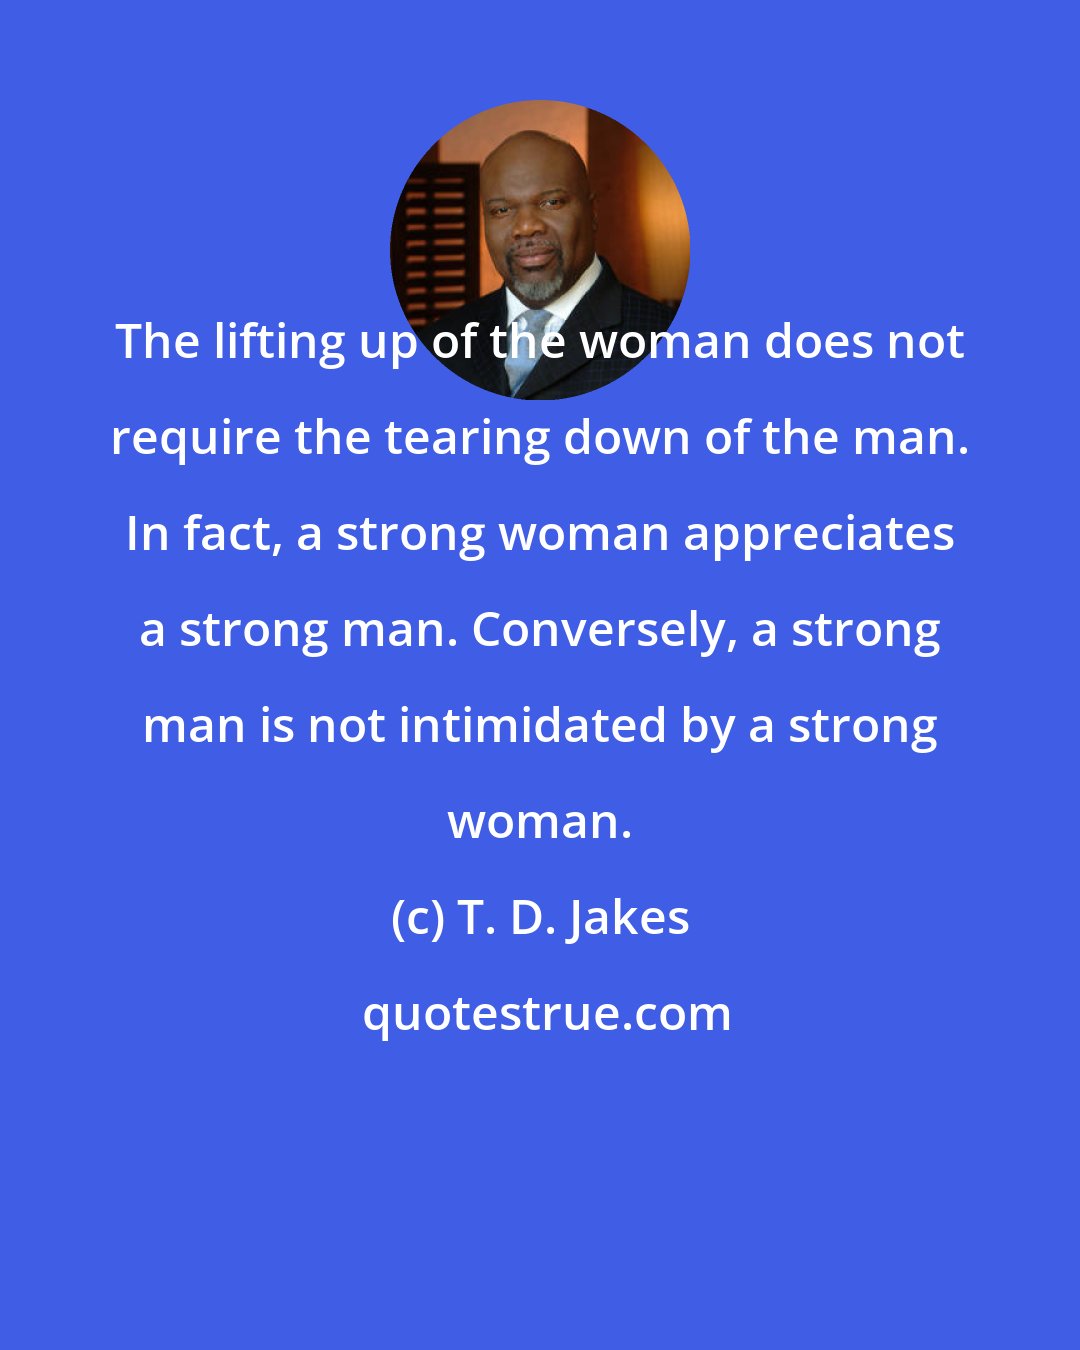 T. D. Jakes: The lifting up of the woman does not require the tearing down of the man. In fact, a strong woman appreciates a strong man. Conversely, a strong man is not intimidated by a strong woman.